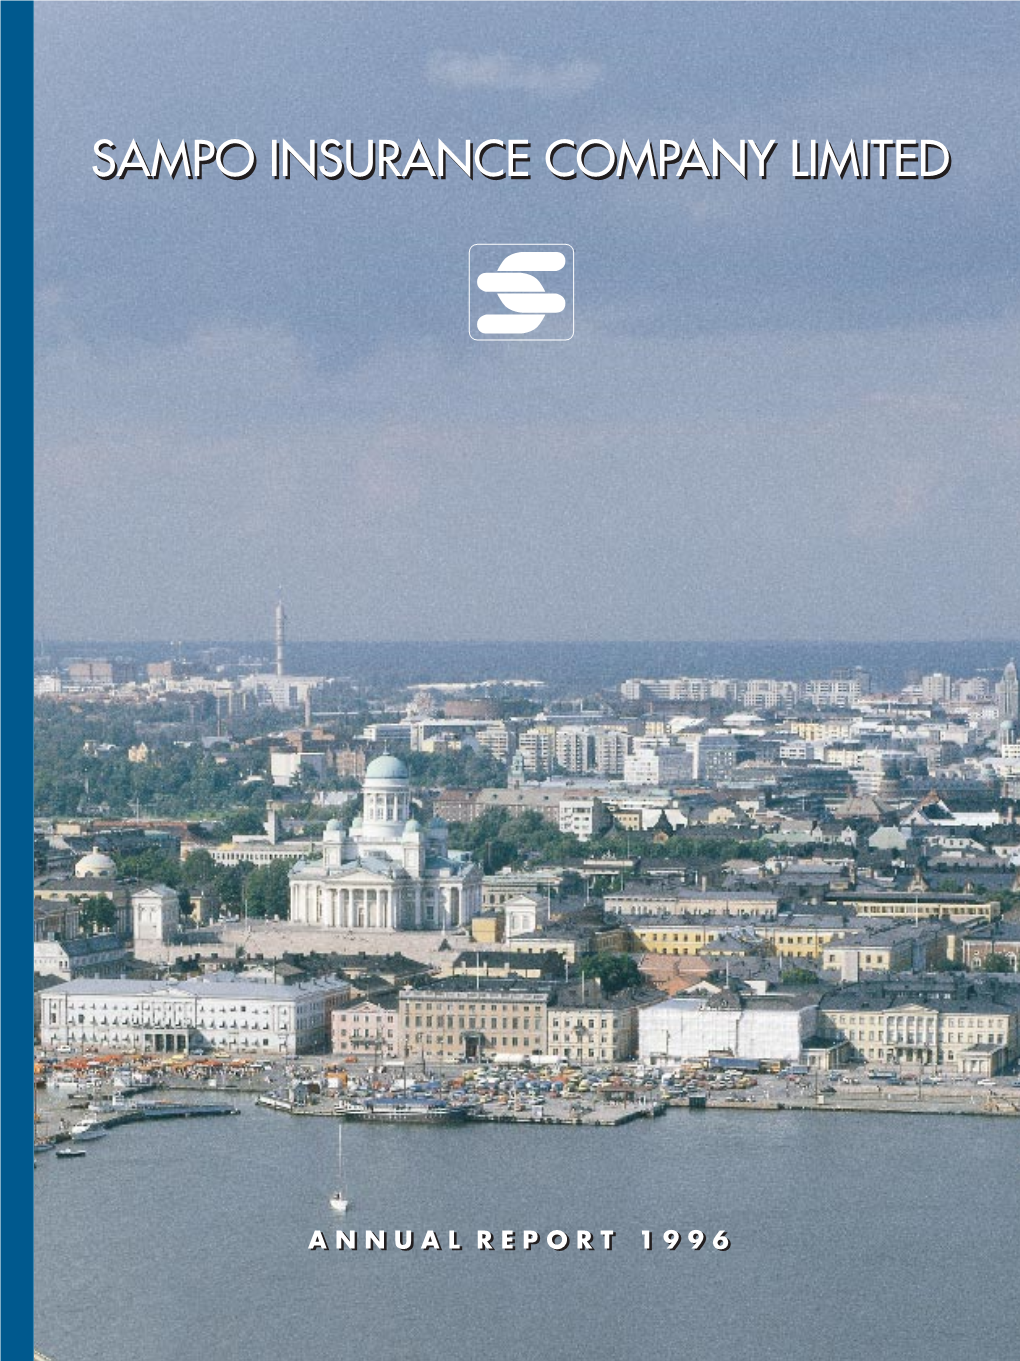 Sampo Annual Report 1996 1 Chief Executive Officer’S Review